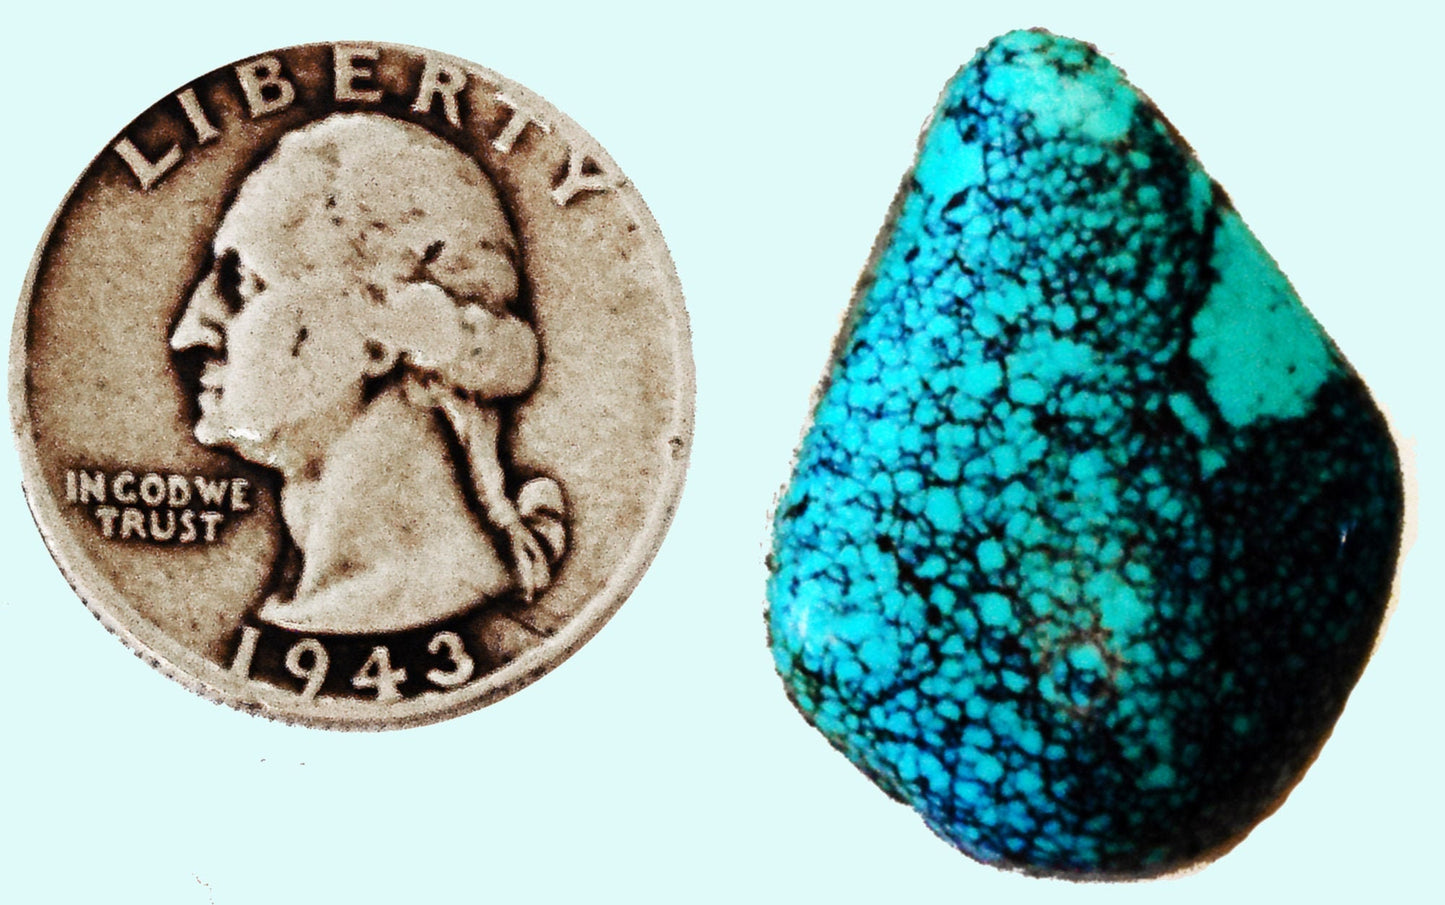 34.5 carat 100% natural, spiderweb turquoise from Hubie